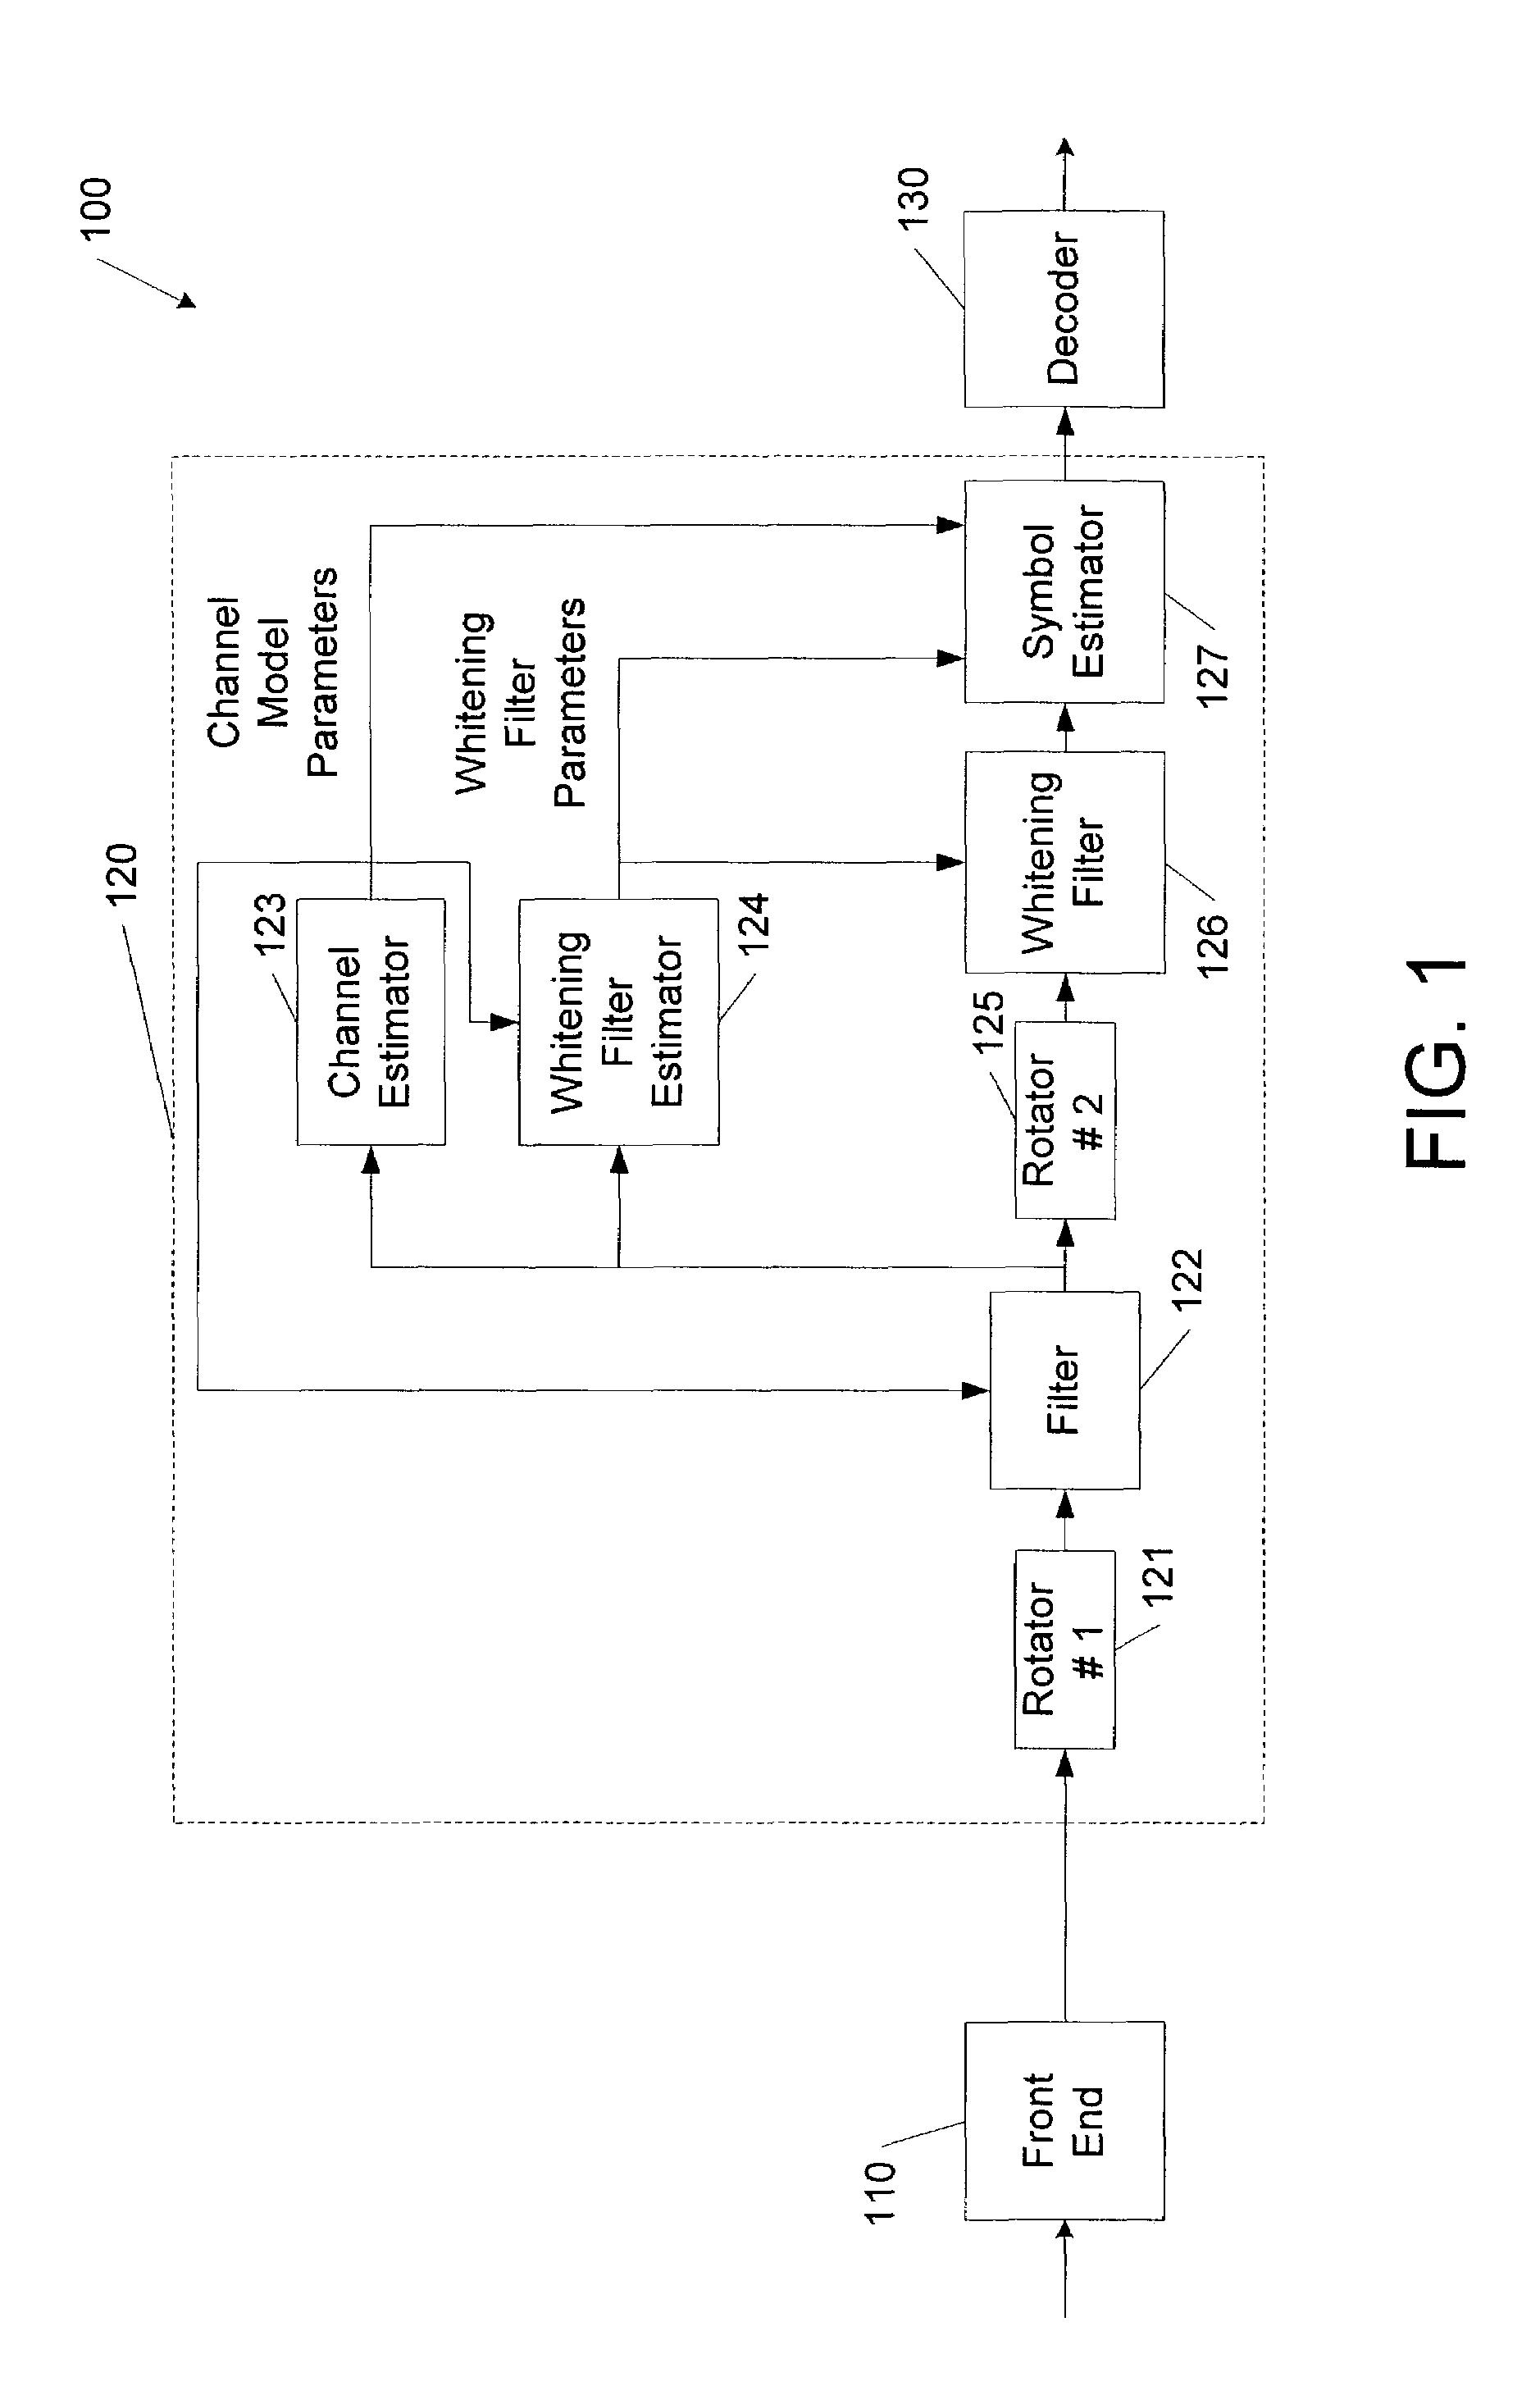 Apparatus and methods for suppression of interference among disparately-modulated signals